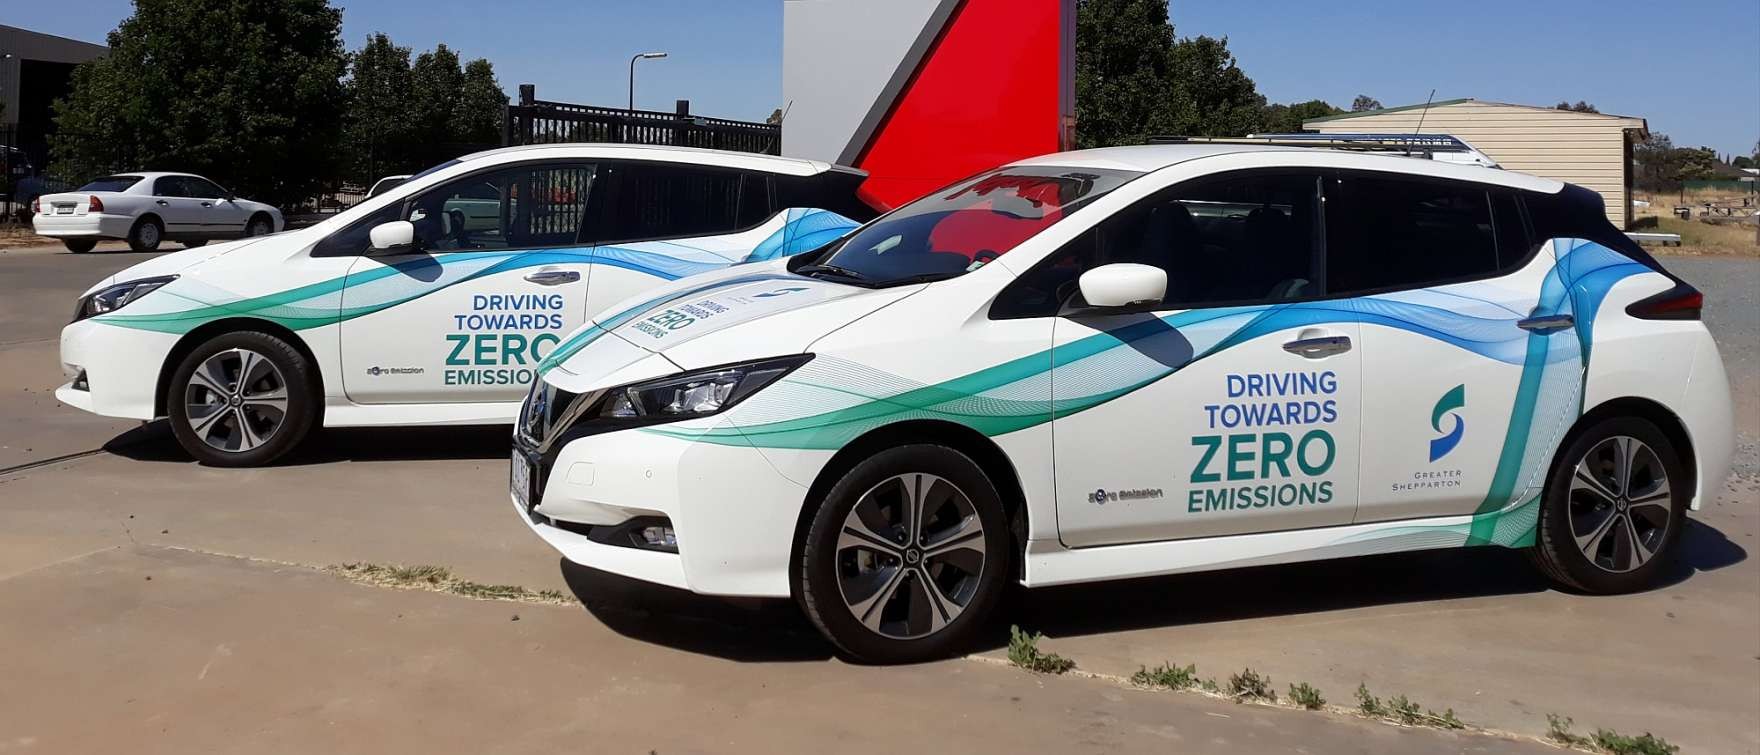 Council's two fully electric Nissan Leaf vehicles aim to reduce our greenhouse gas emissions and pollution.